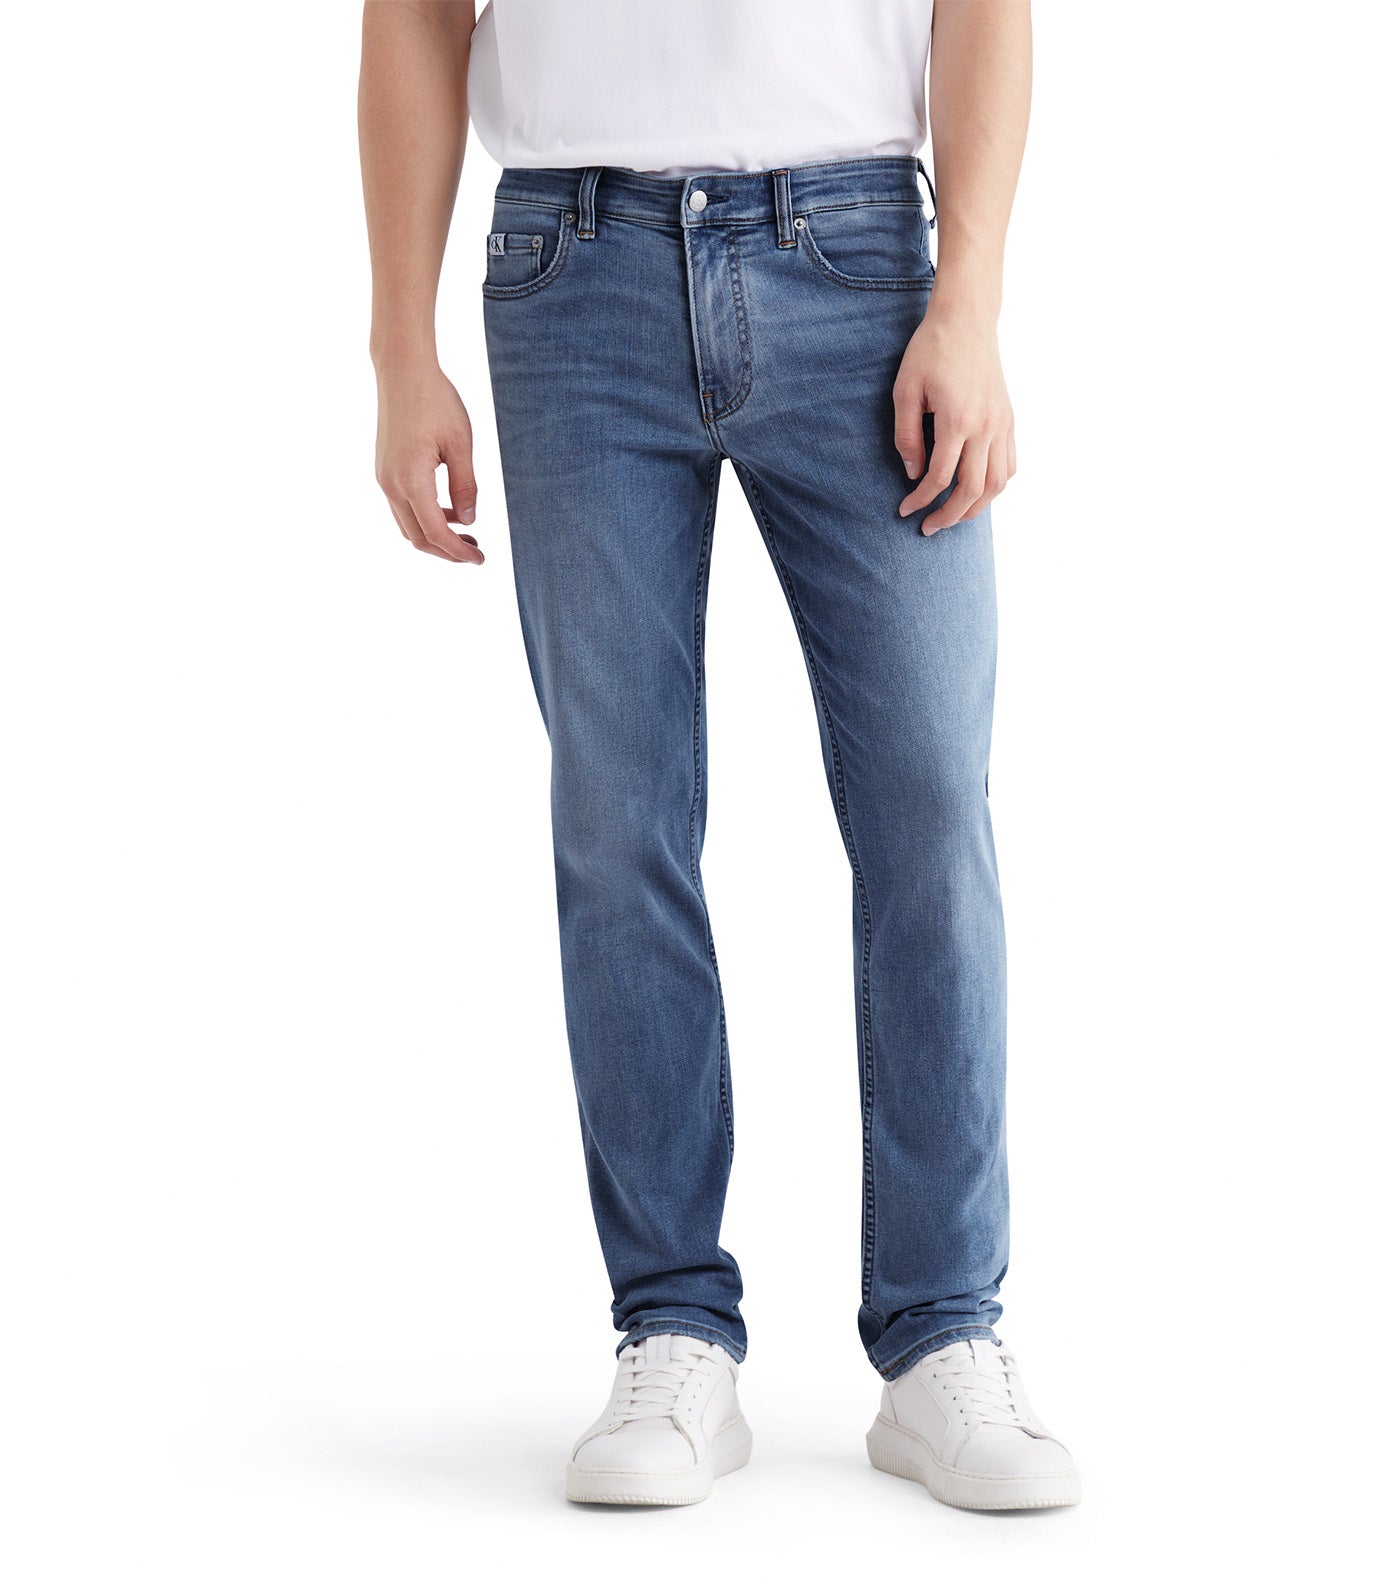 Cooling Body Jeans Blue